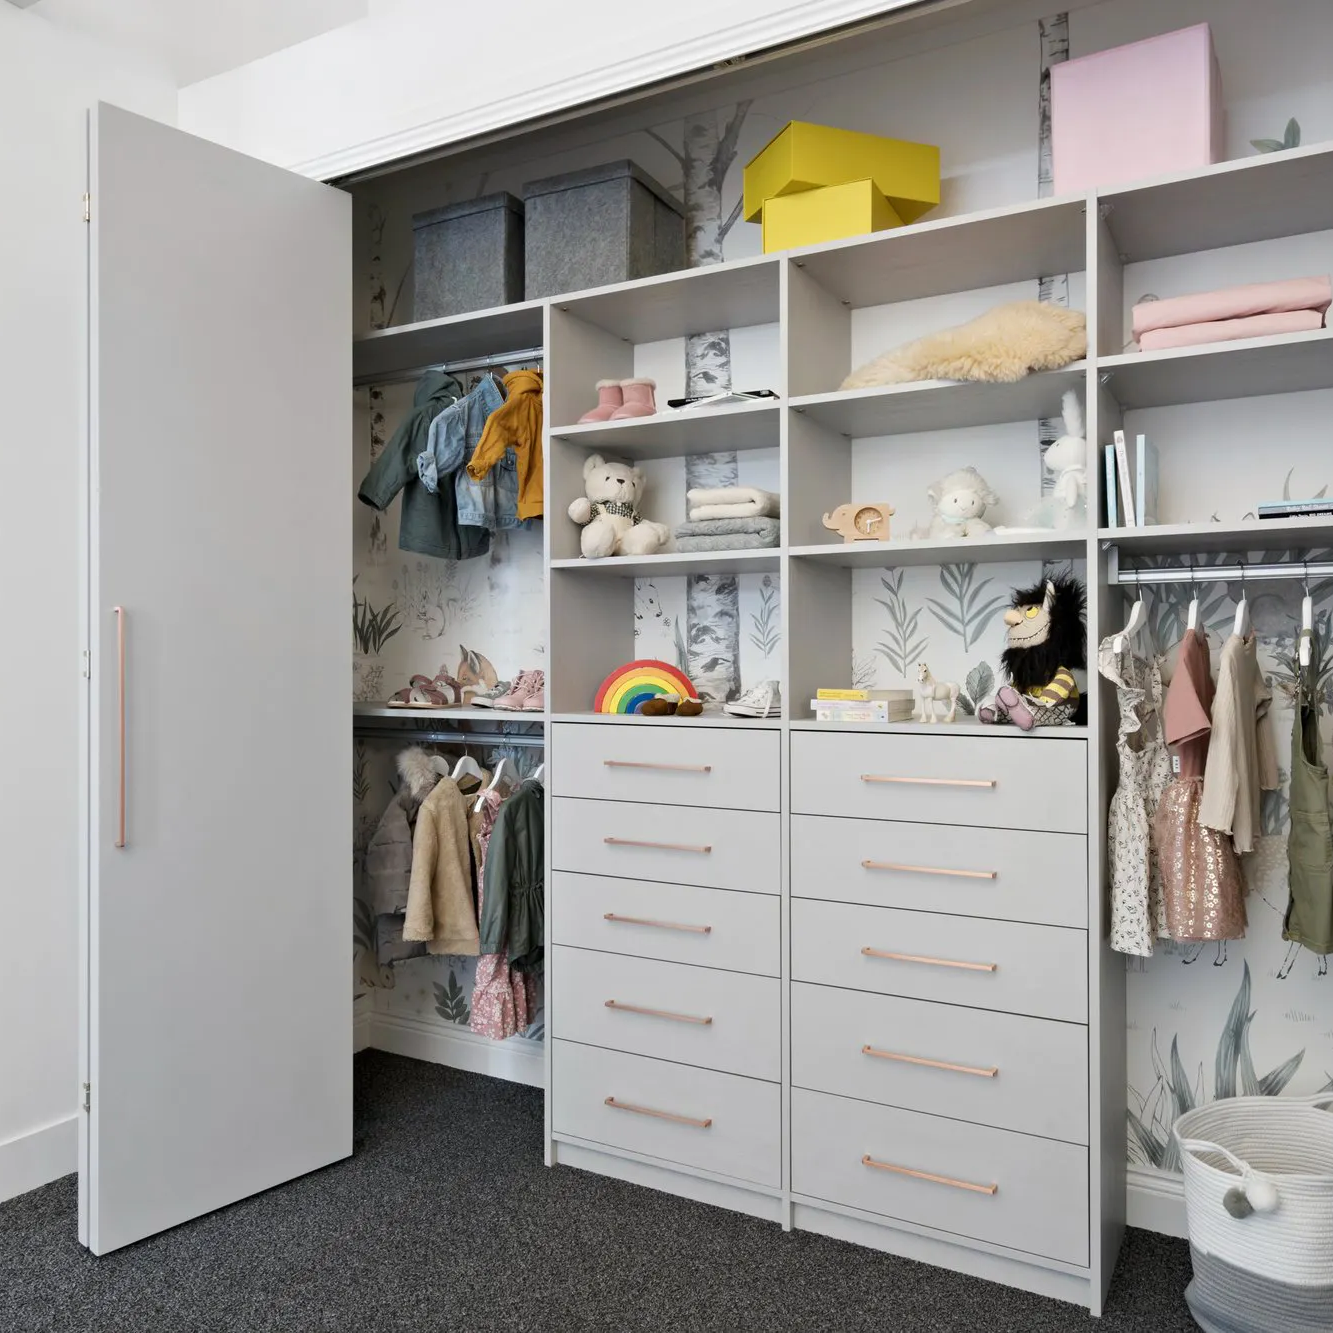 Image of a wall wardrobe or reach-in wardrobe with grey shelving and whimsical wallpaper. There are kids clothes and toys inside